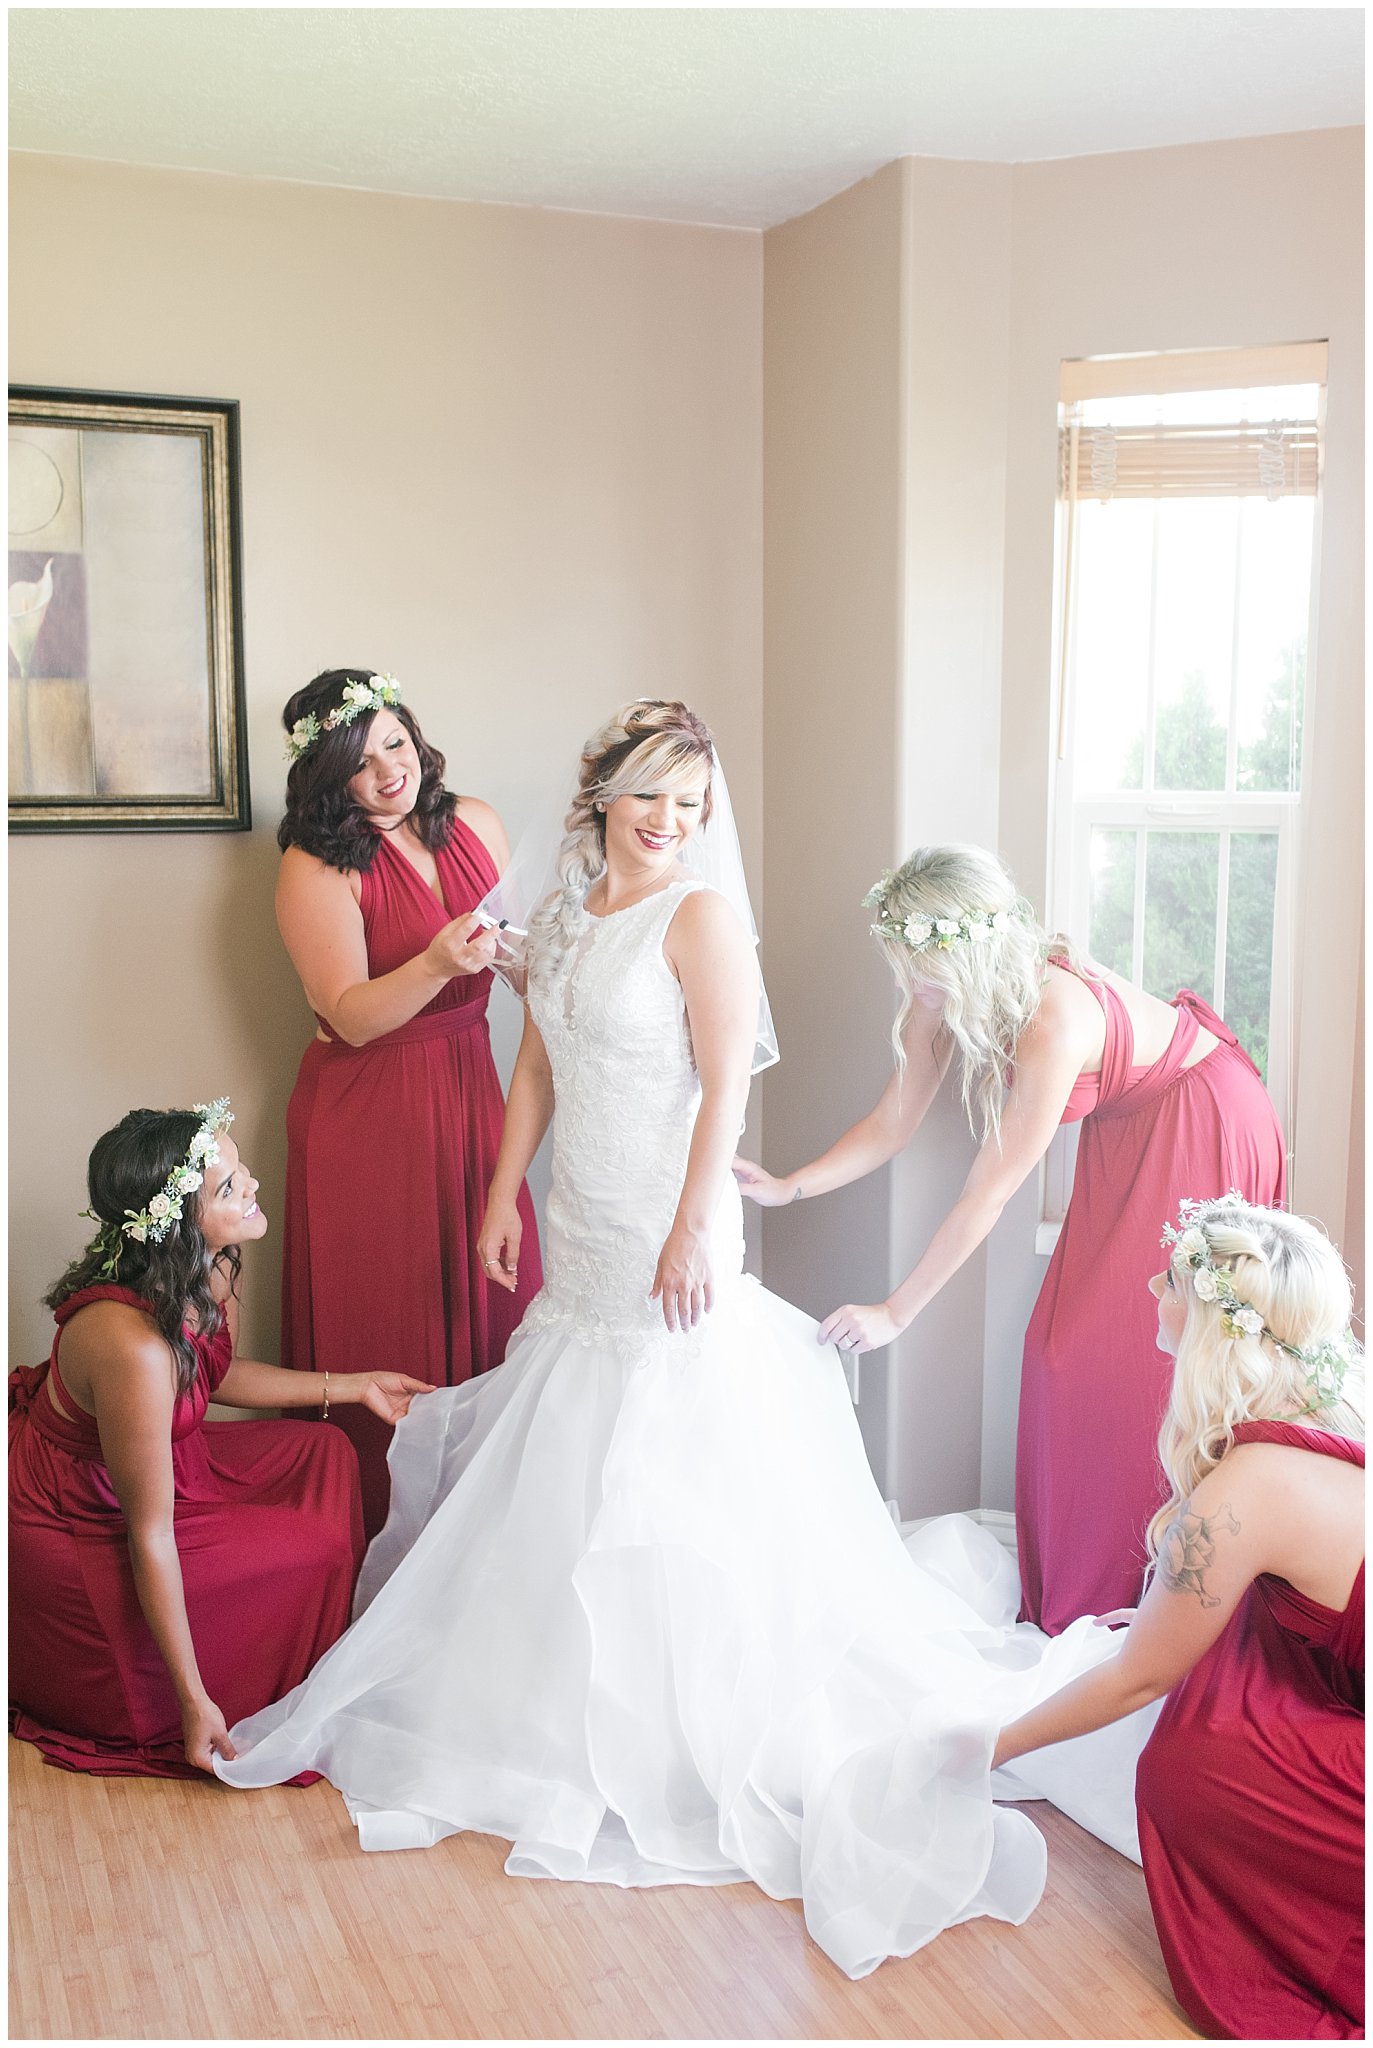 Bride getting ready with help of bridesmaids | Log Haven Summer Mountain Wedding | Jessie and Dallin Photography